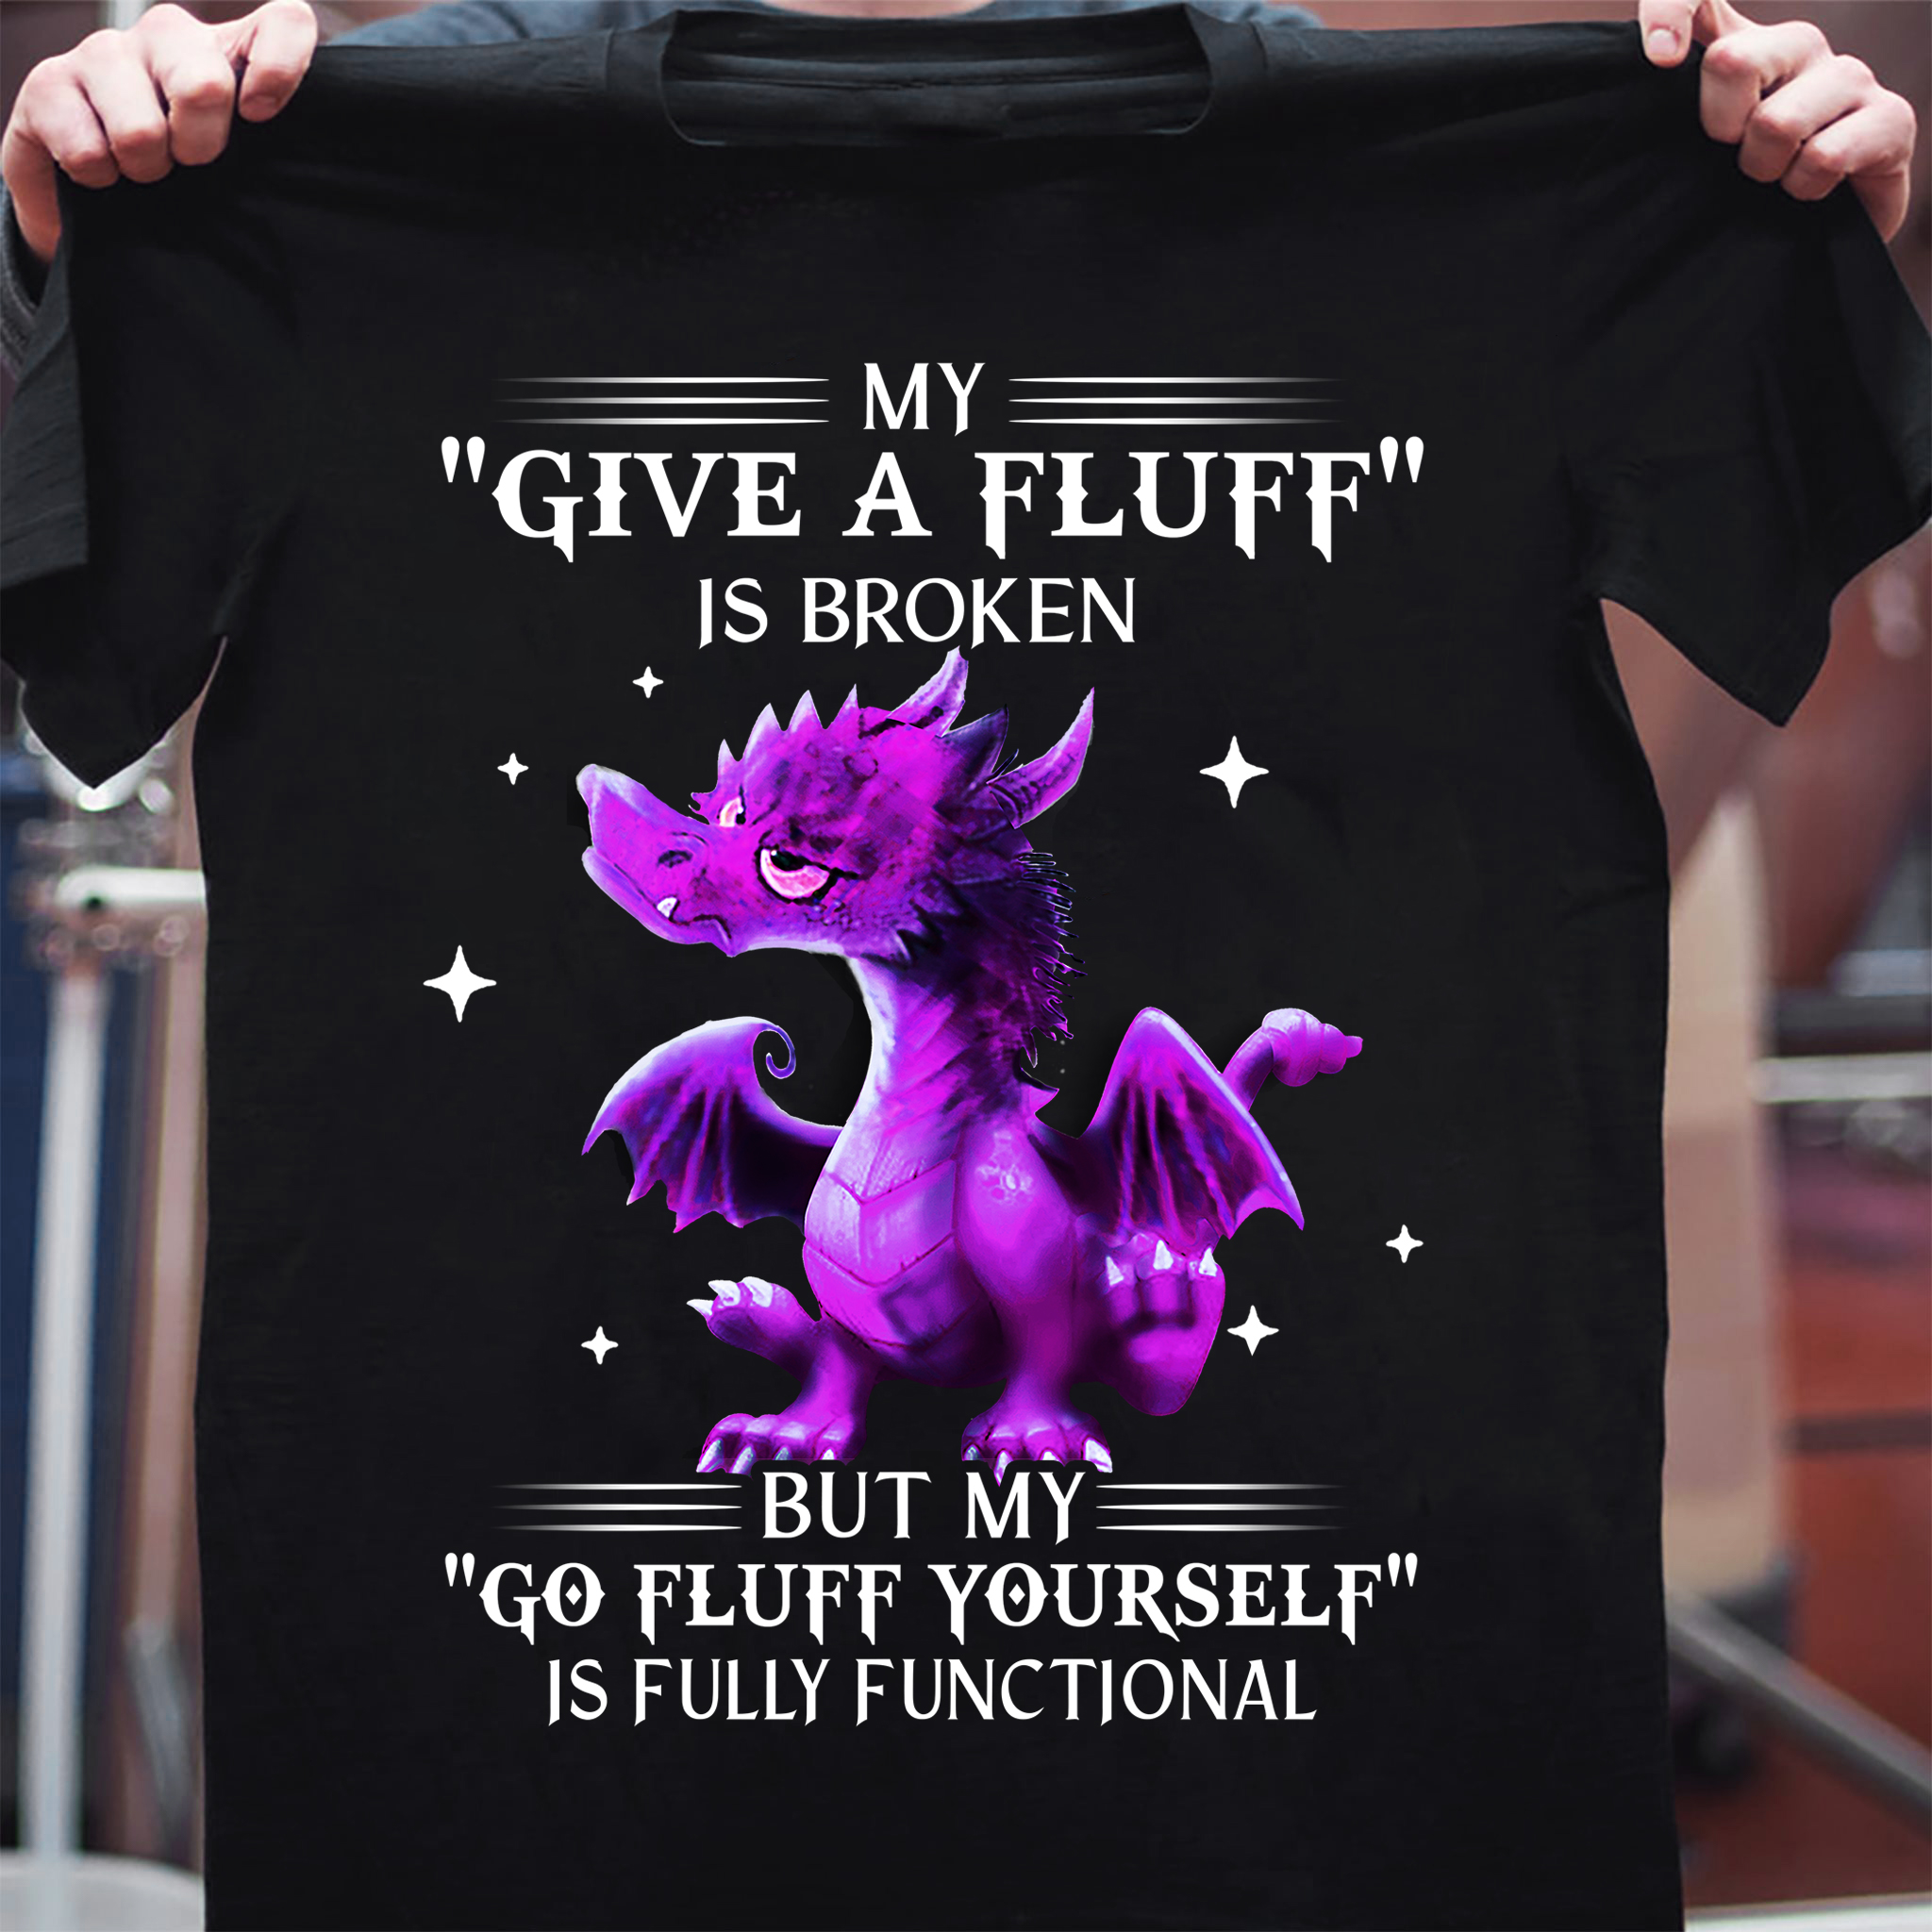 My a give a fluff is broken but my go fluff yourself is fully functional - Grumpy dragon